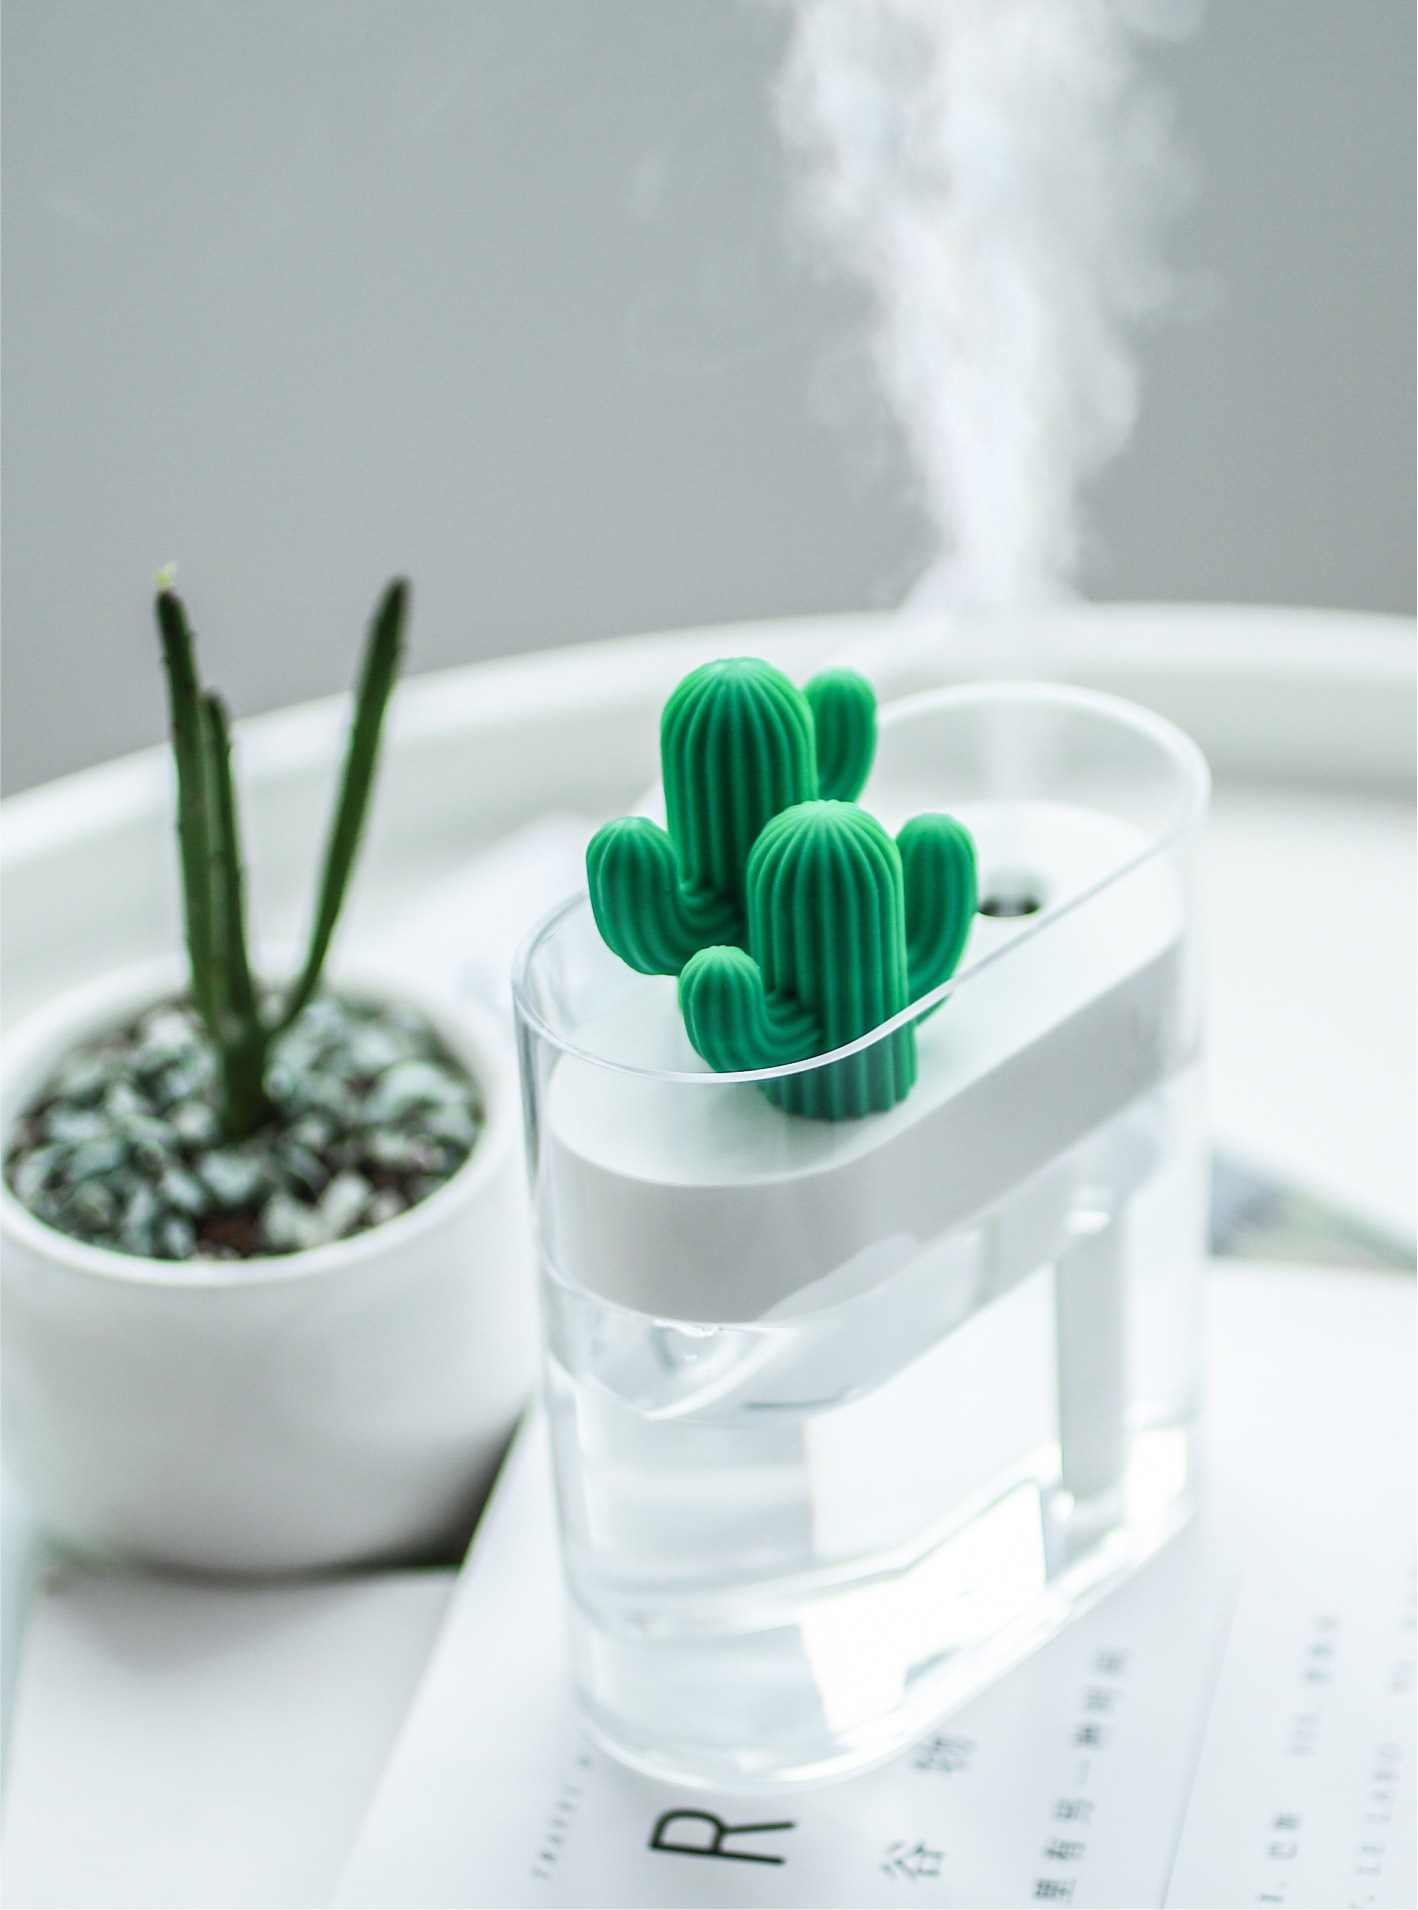 Sanhuo 319 Humidifier Cactus Transparent Household USB Interface Silent Bedroom Air Dormitory Small Desktop